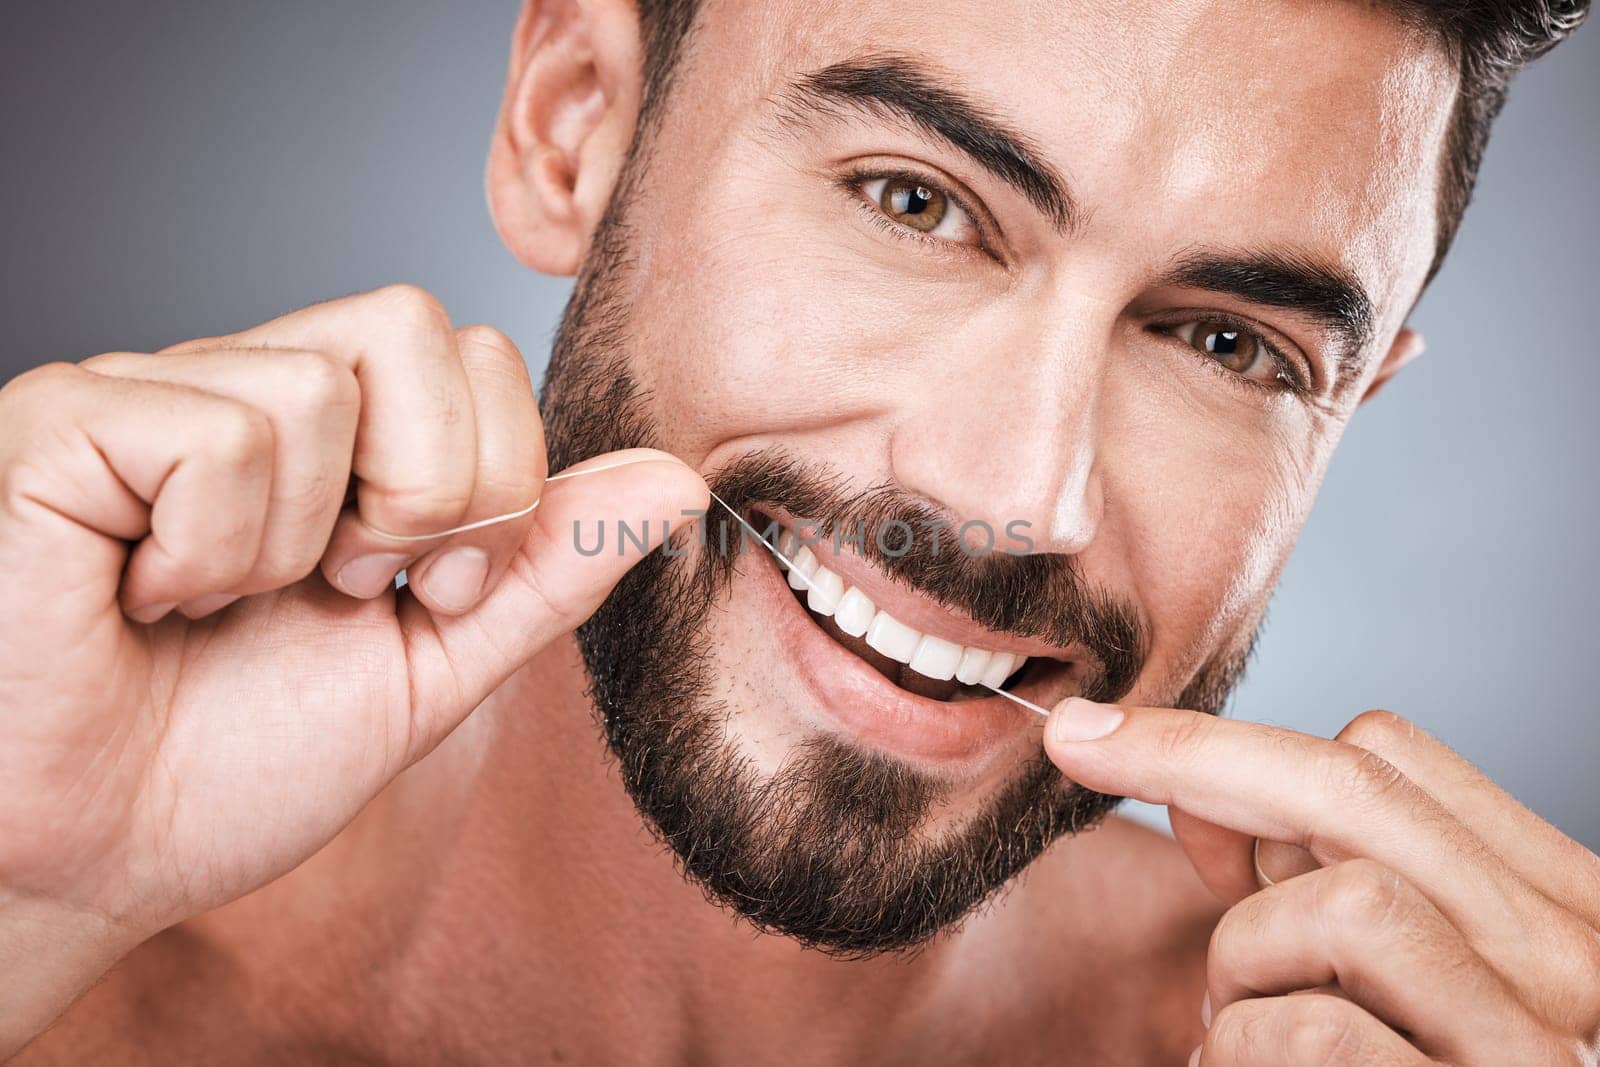 Floss, cleaning teeth and portrait of man in studio for beauty, healthy body and hygiene on background. Male model, tooth flossing and mouth for facial smile, fresh breath and happy dental wellness.